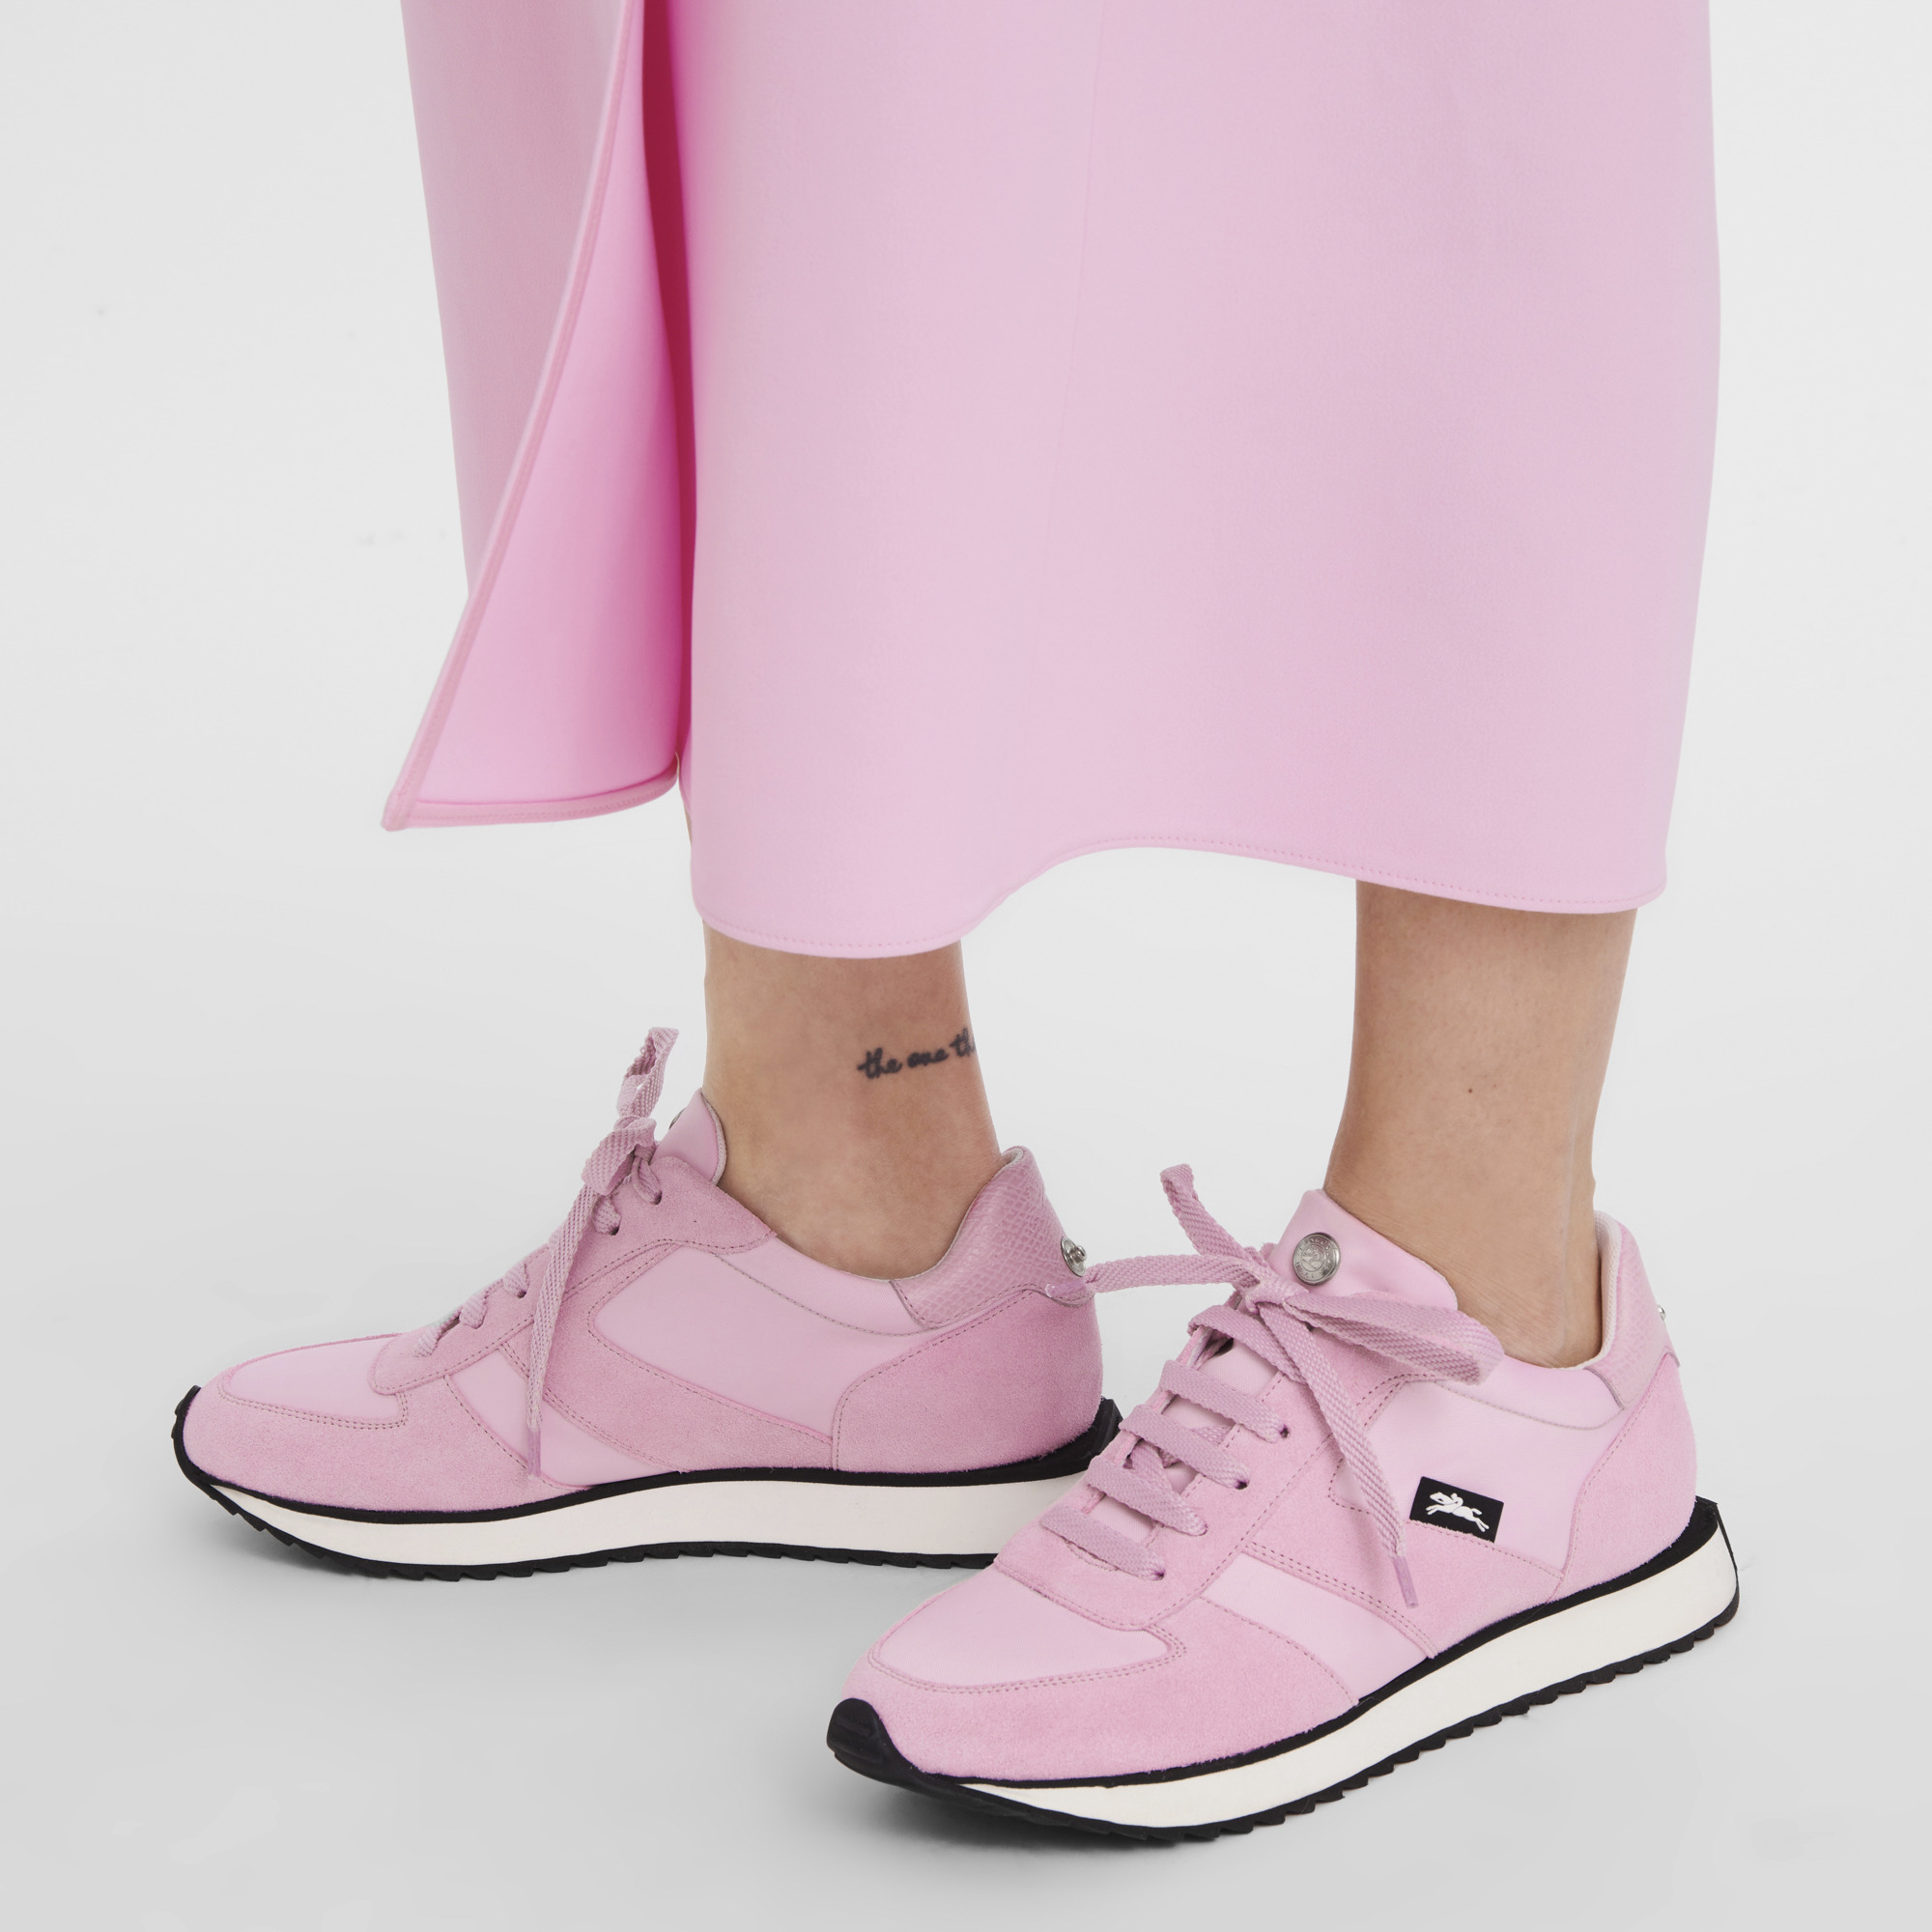 Le Pliage Green Sneakers Pink - Leather - 2